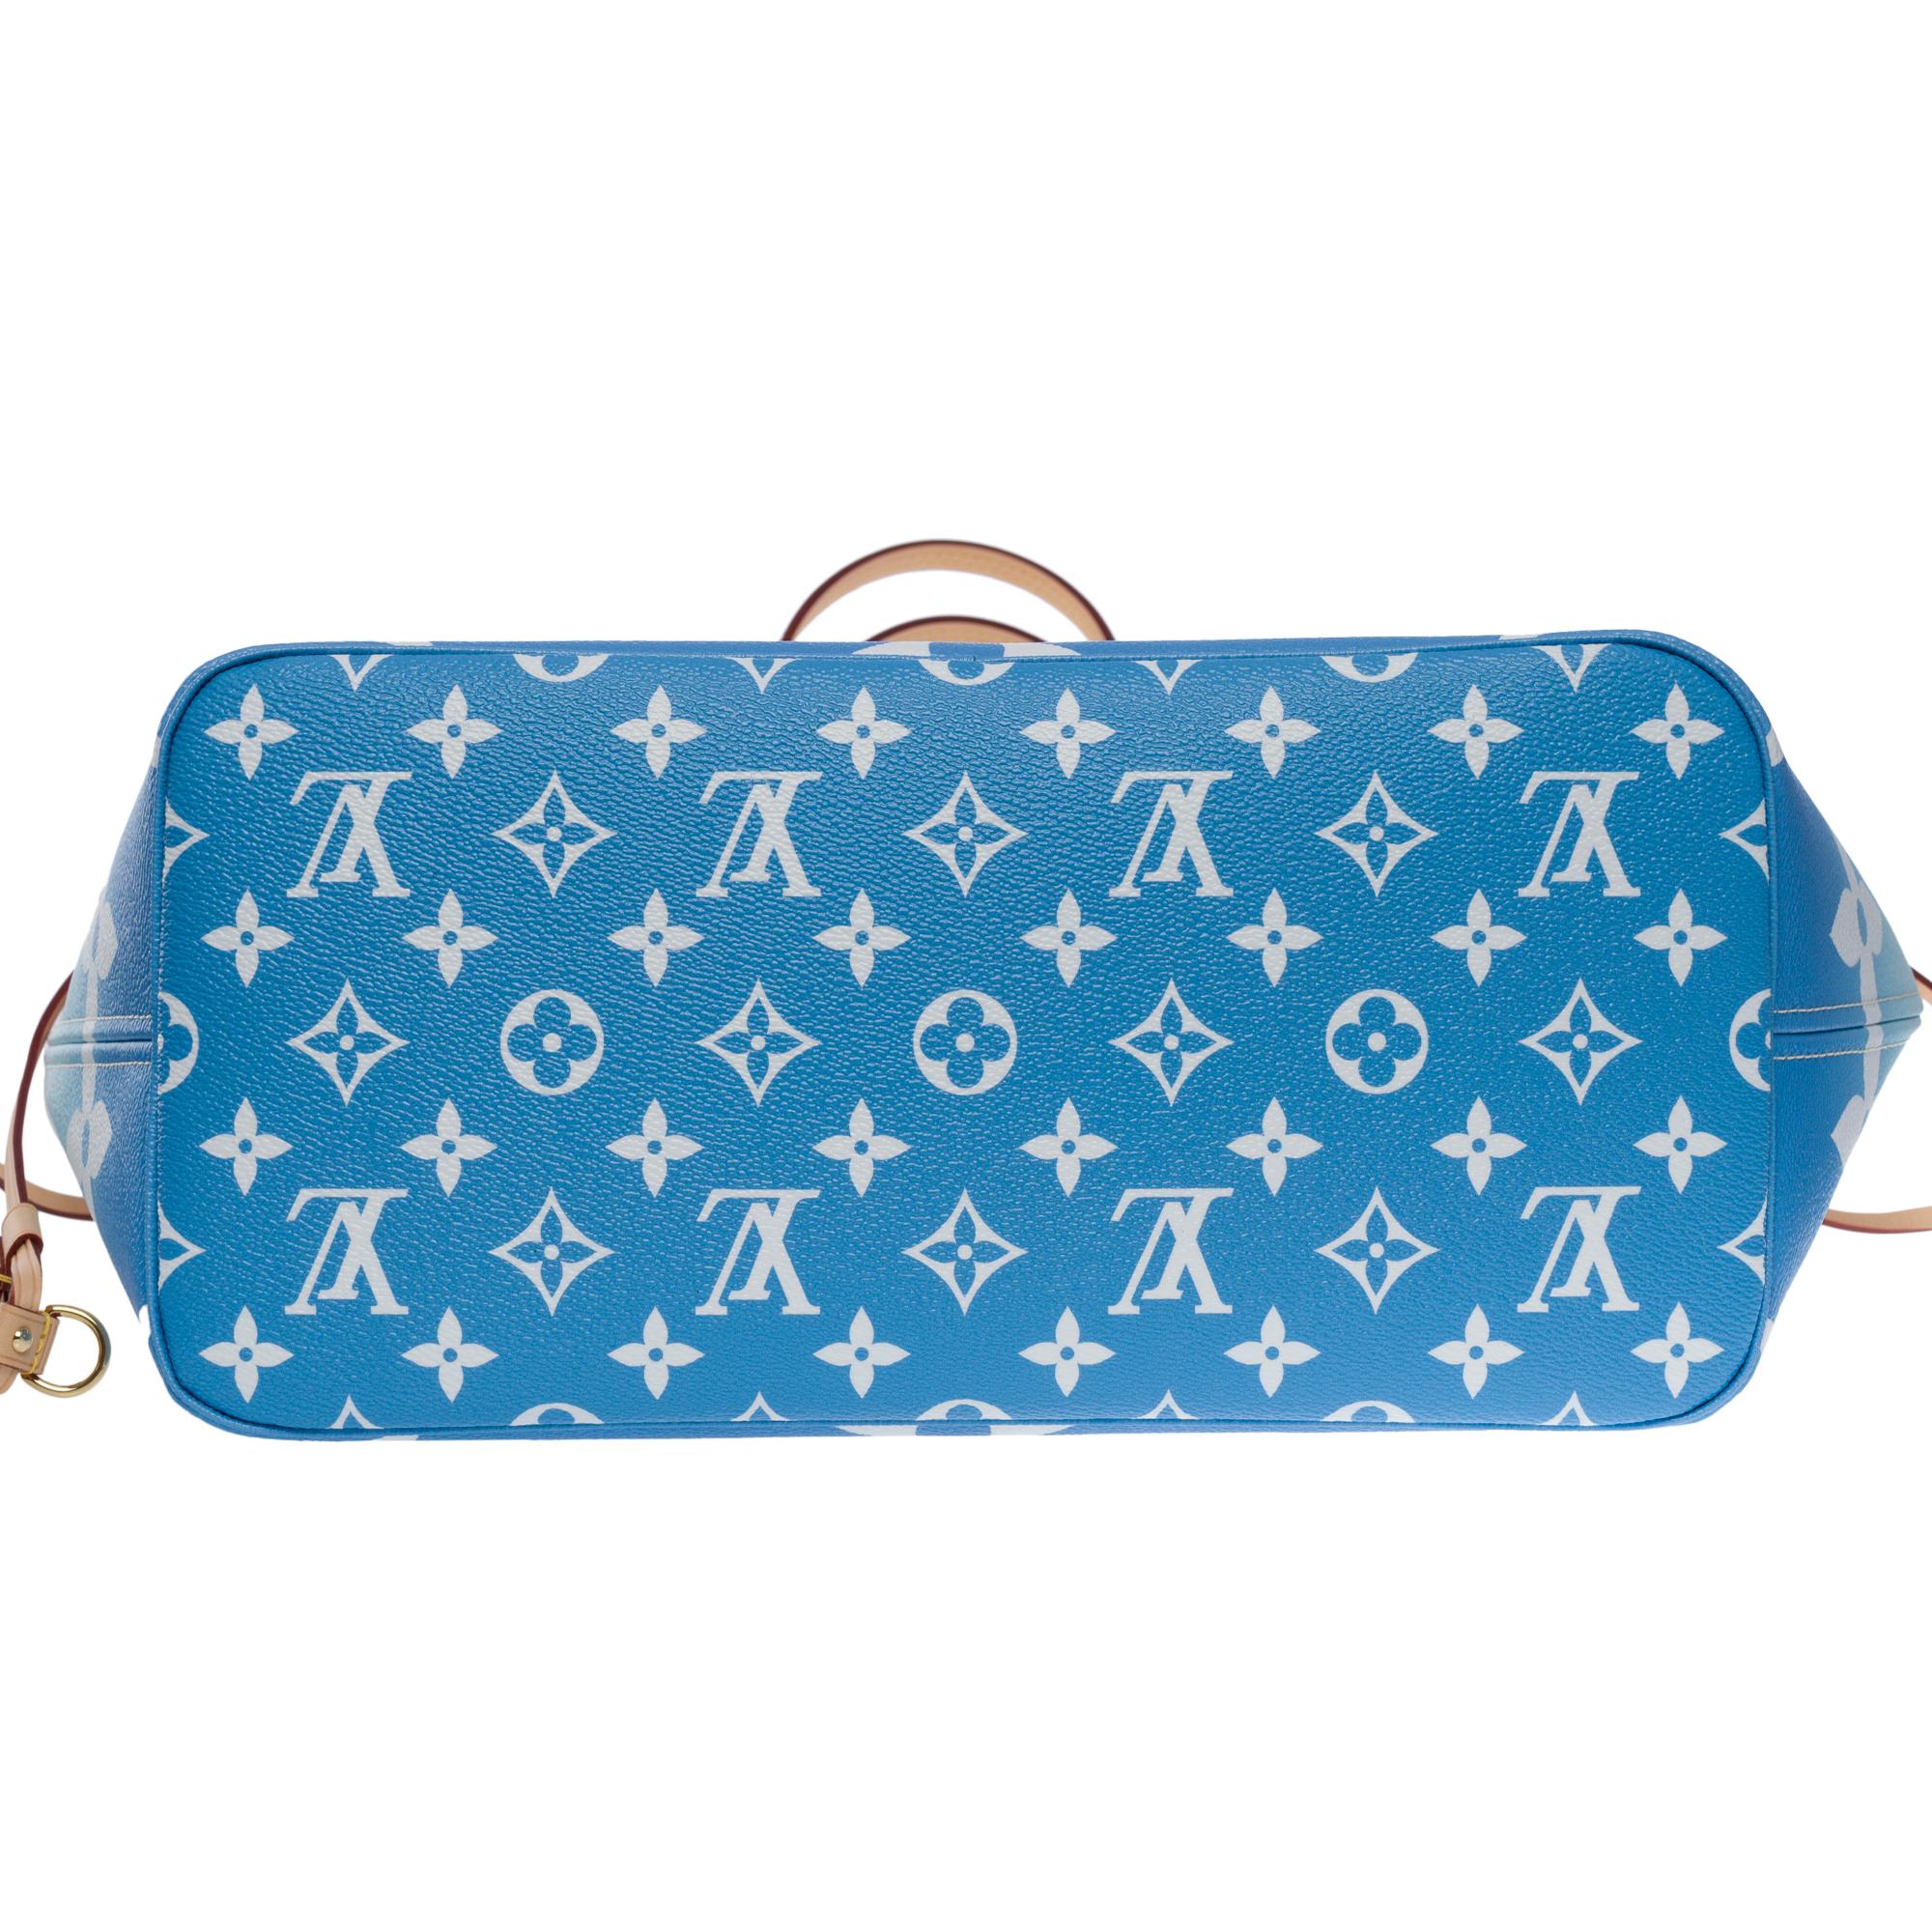 New Louis Vuitton Neverfull MM By the Pool Tote bag in Blue&White Canvas, GHW 8